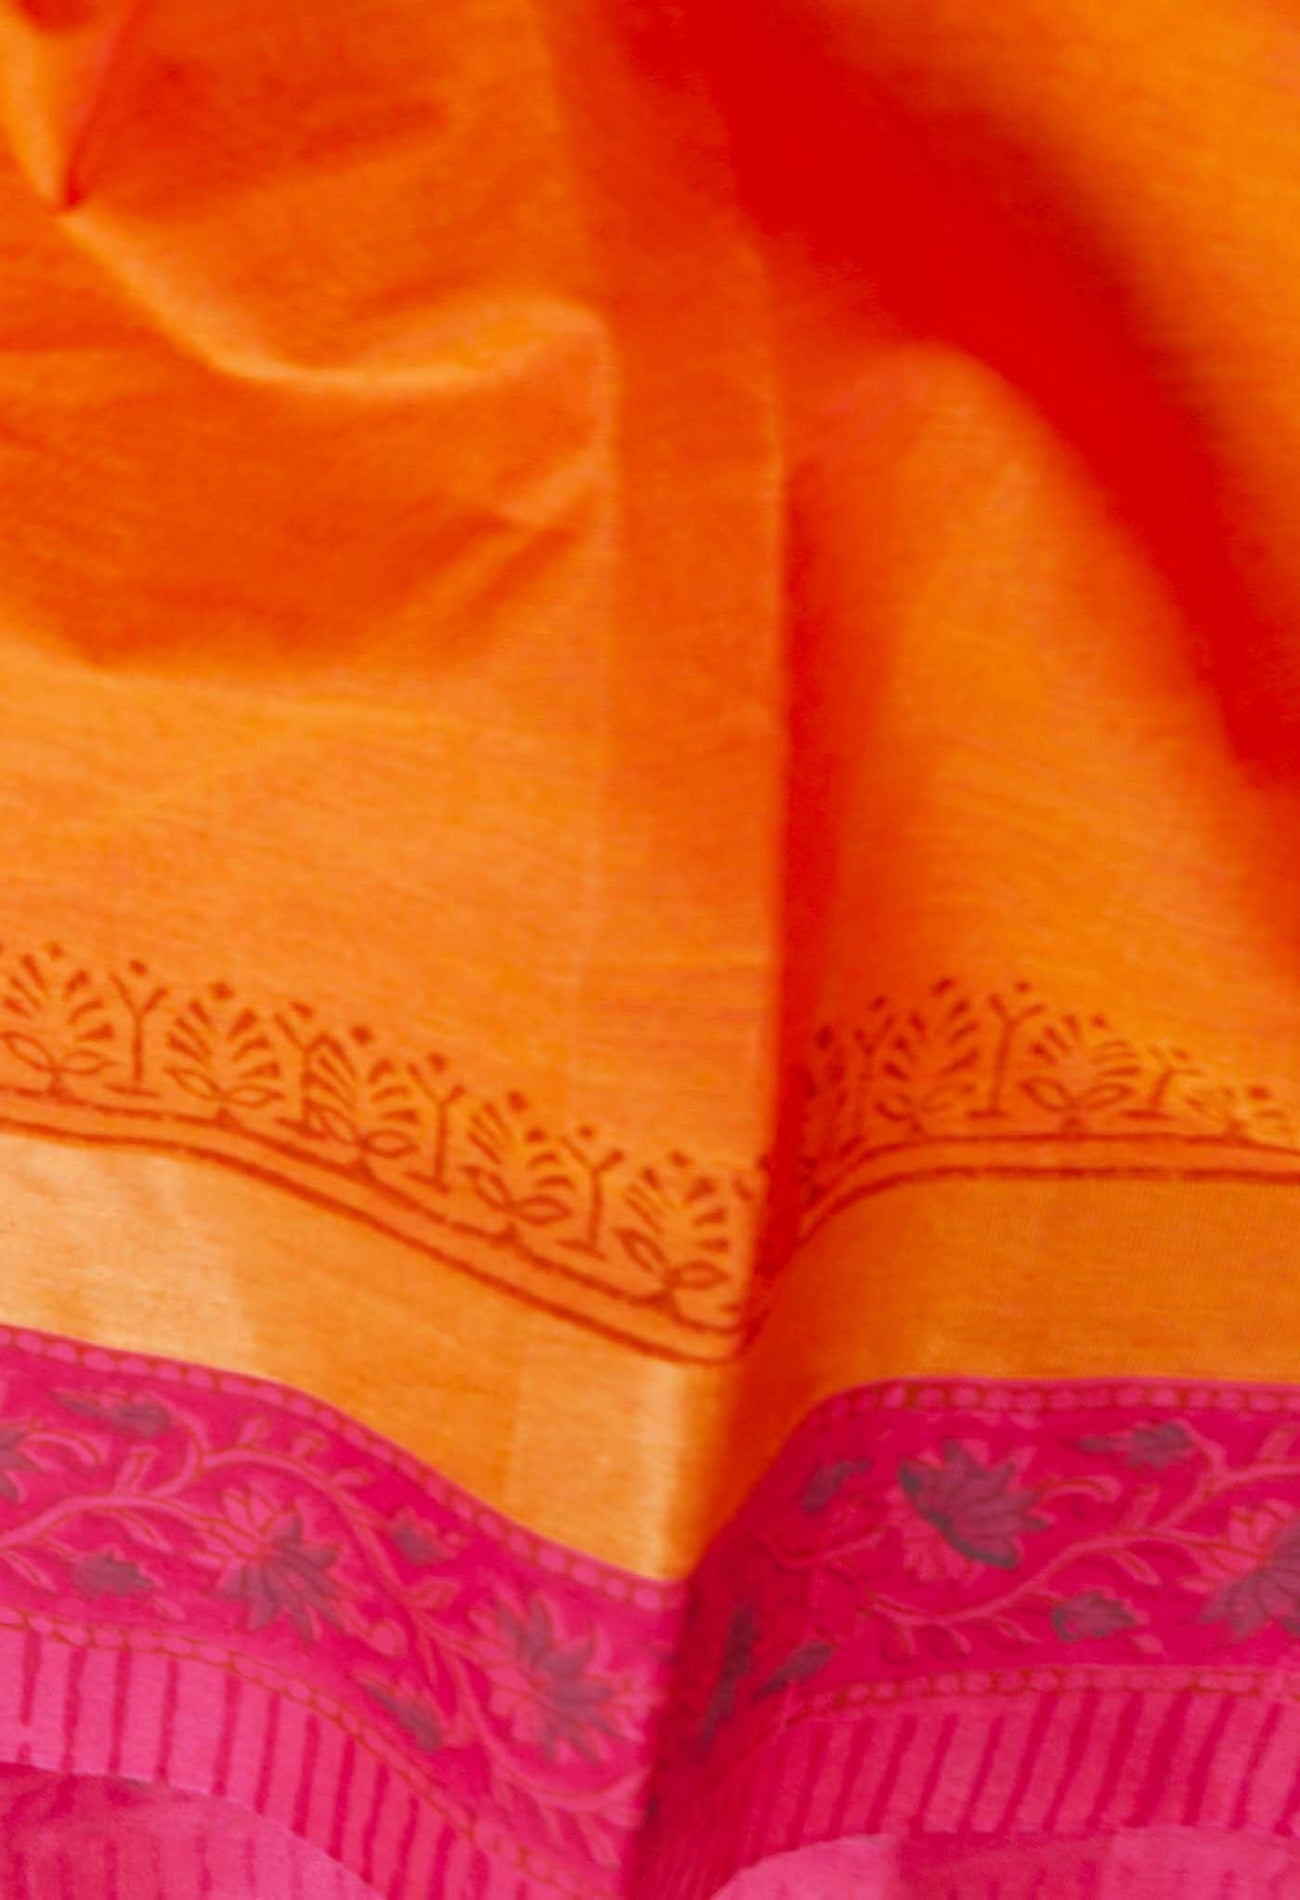 Online Shopping for Orange Pure Embroidered Mangalagiri Cotton Saree with Embroidery from Andhra Pradesh at Unnatisilks.comIndia
